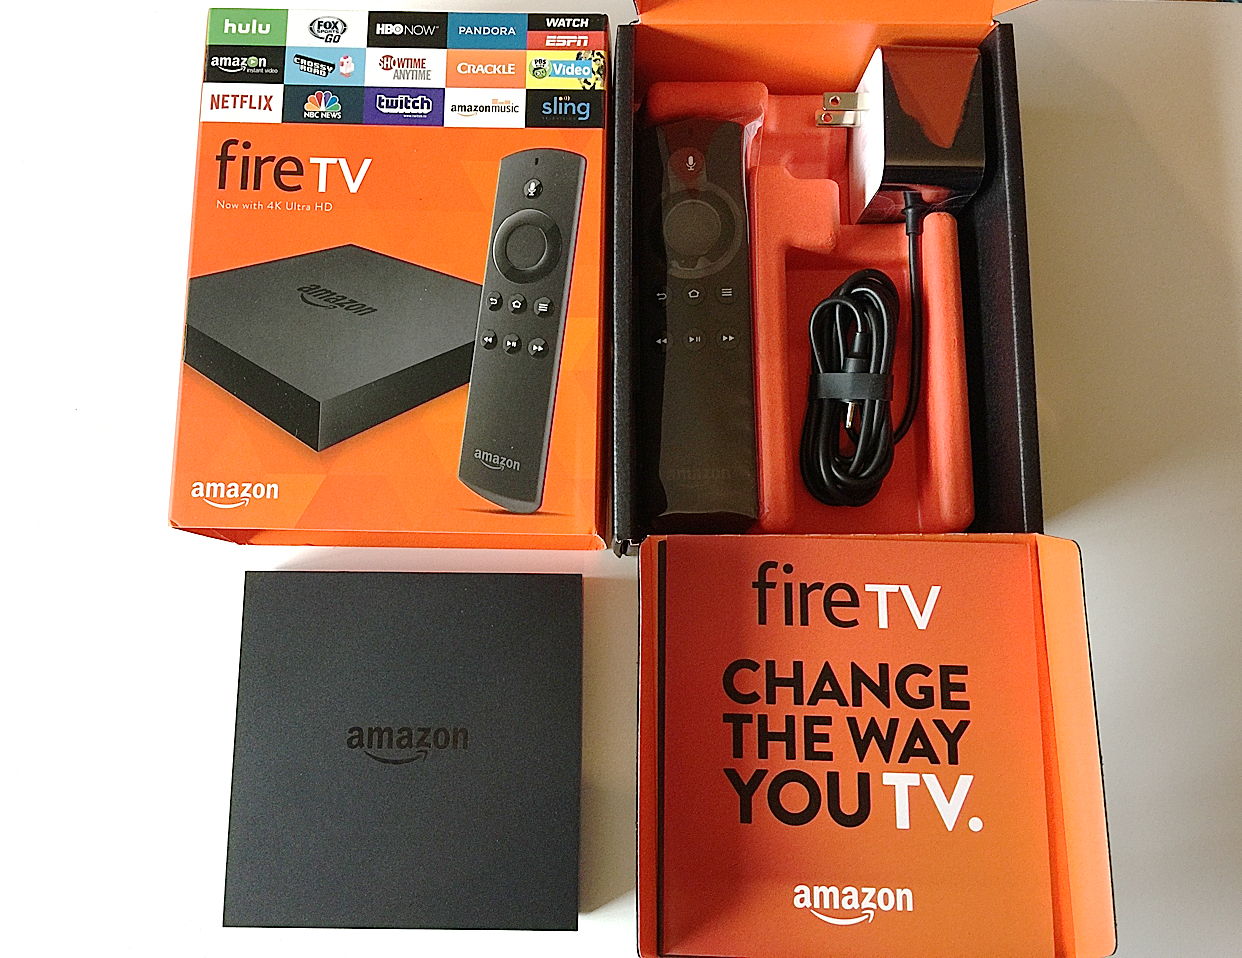 Amazon Fire TV (2015) Review Don't Buy it for the 4K